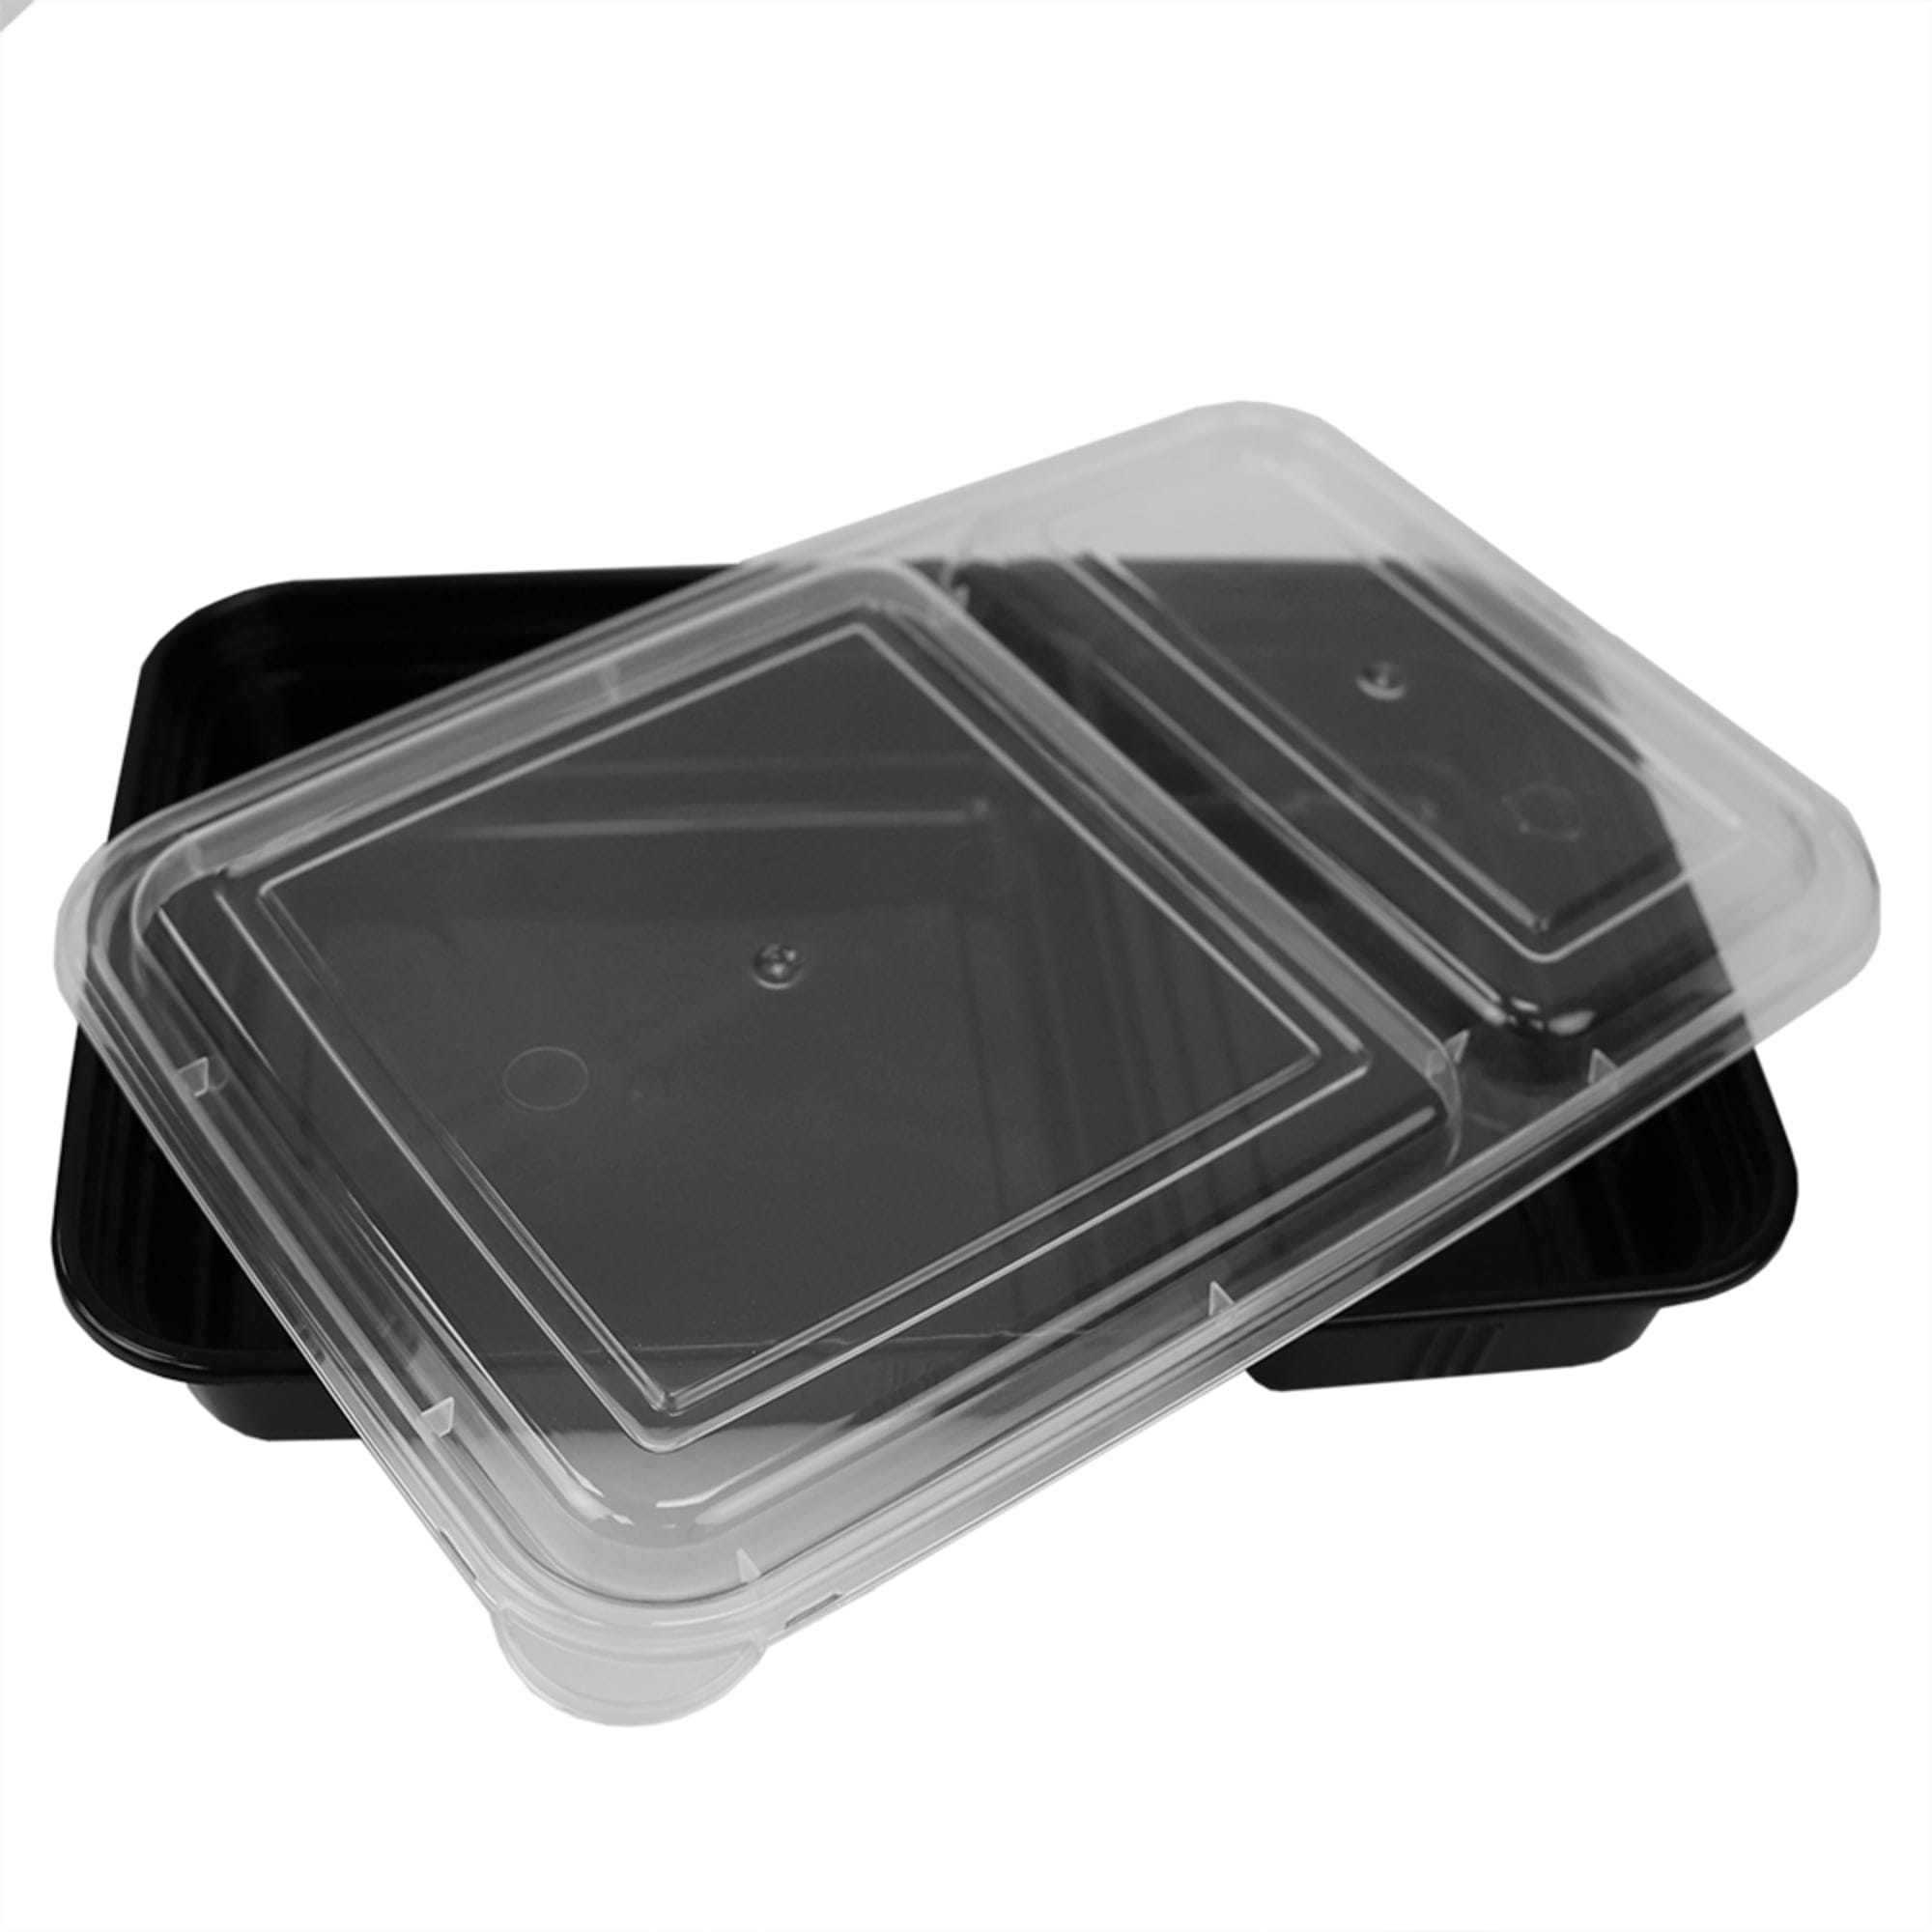 Home Basic 10 Piece 2 Compartment BPA-Free Plastic Meal Prep Containers, Black $4.00 EACH, CASE PACK OF 12